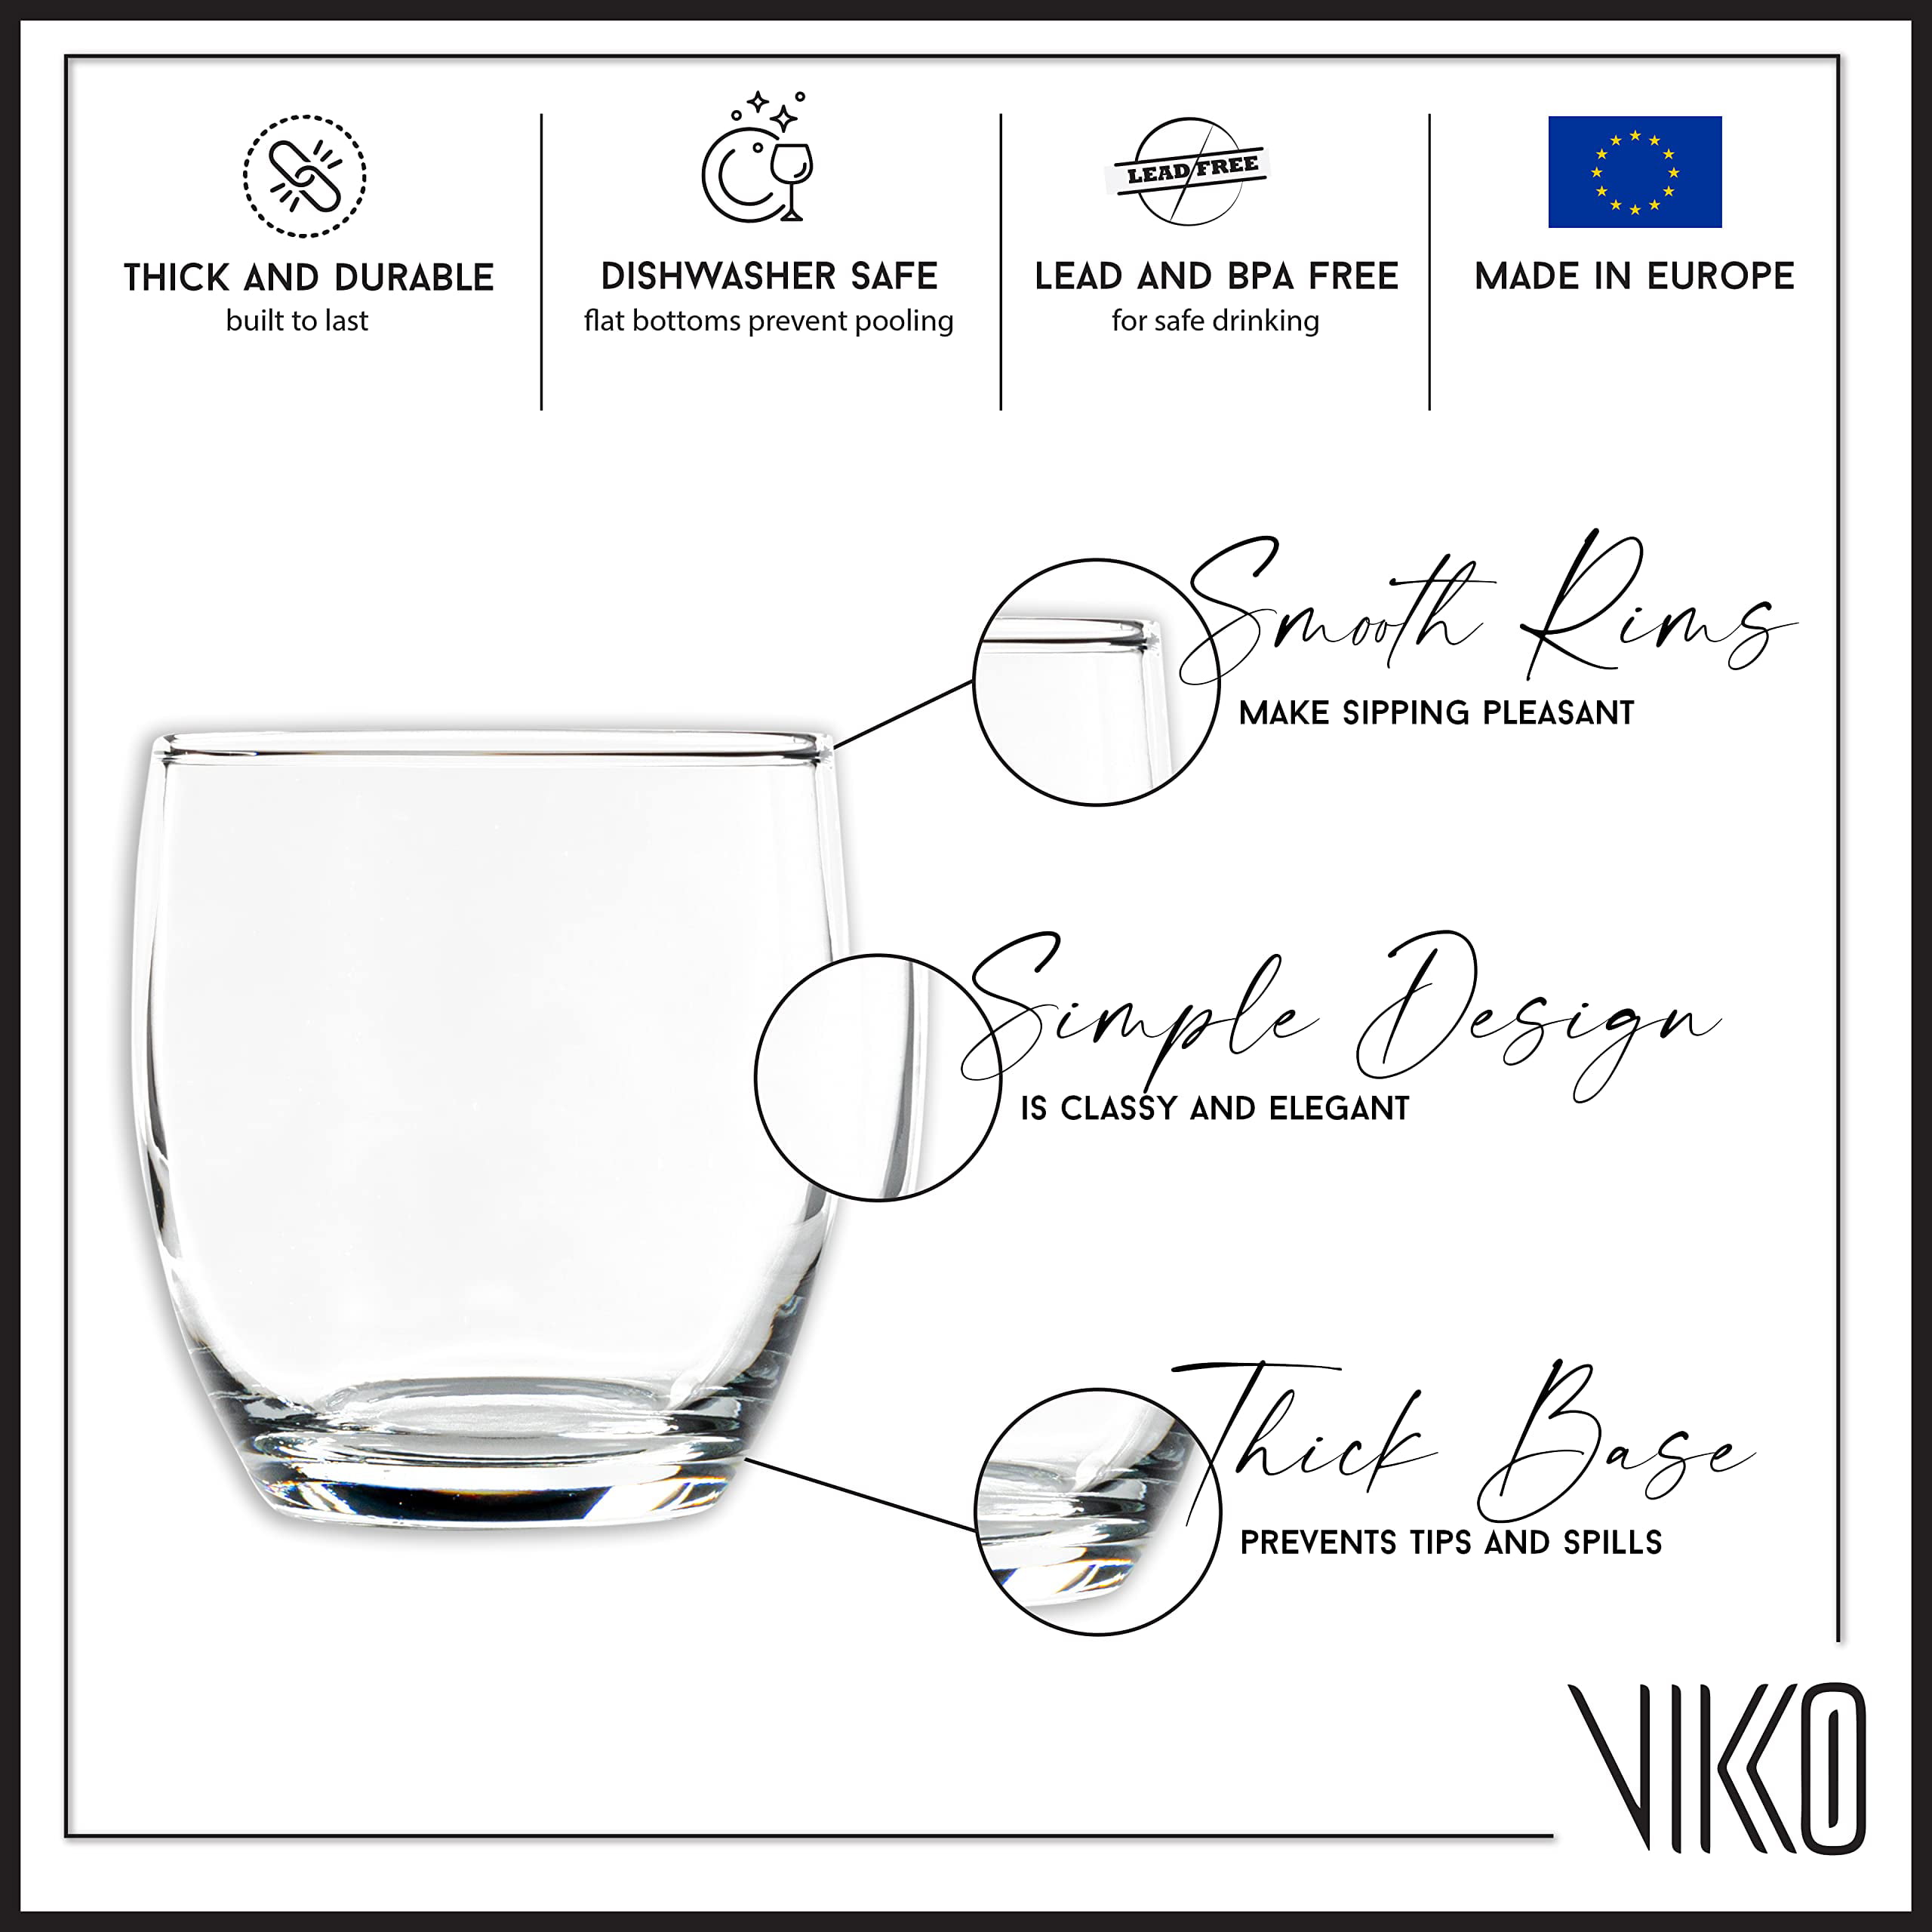 Madison - 10.7 Ounce Drinking Glasses